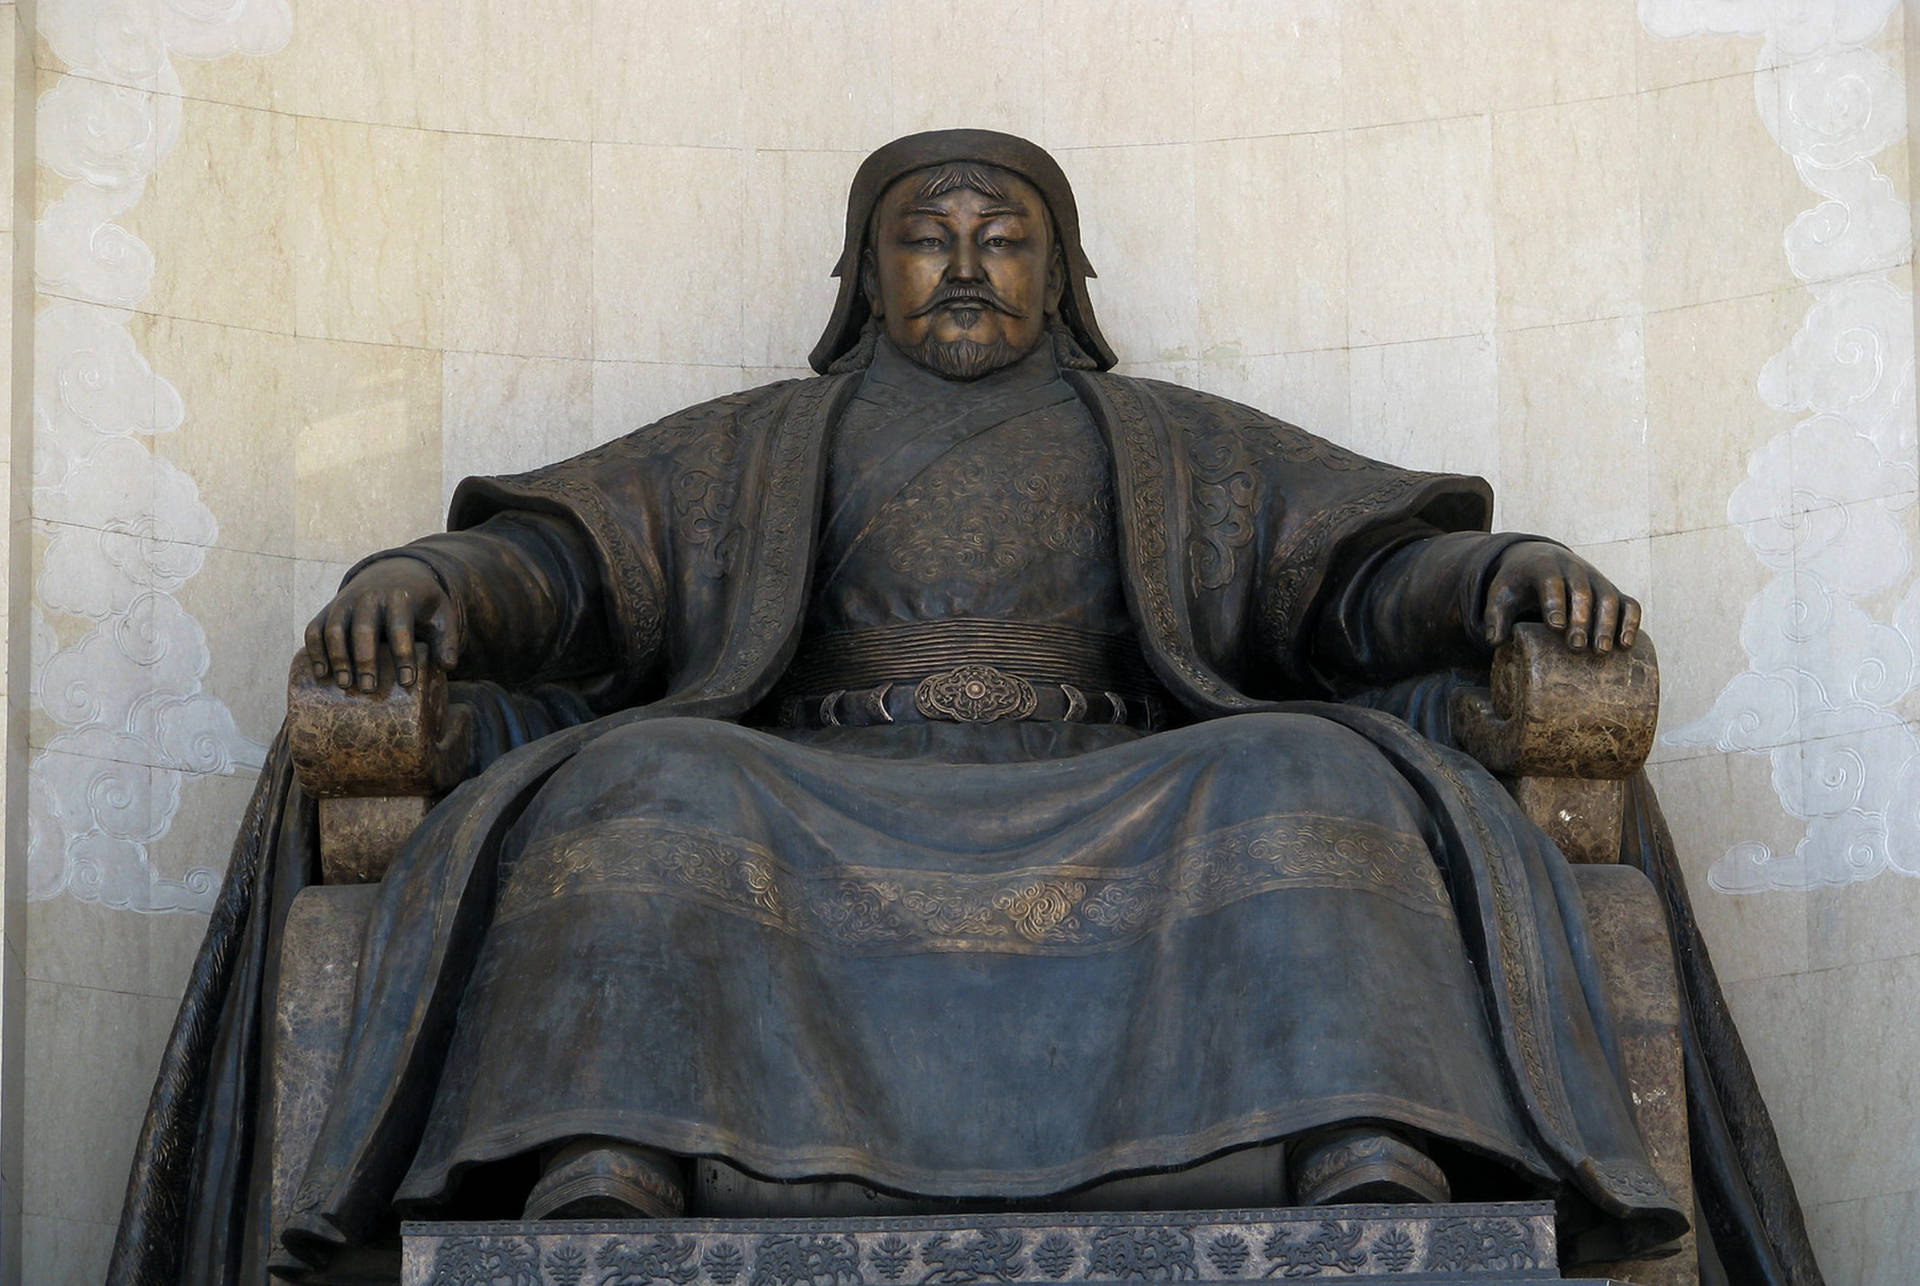 Genghis Khan Statue In Mongolia Background